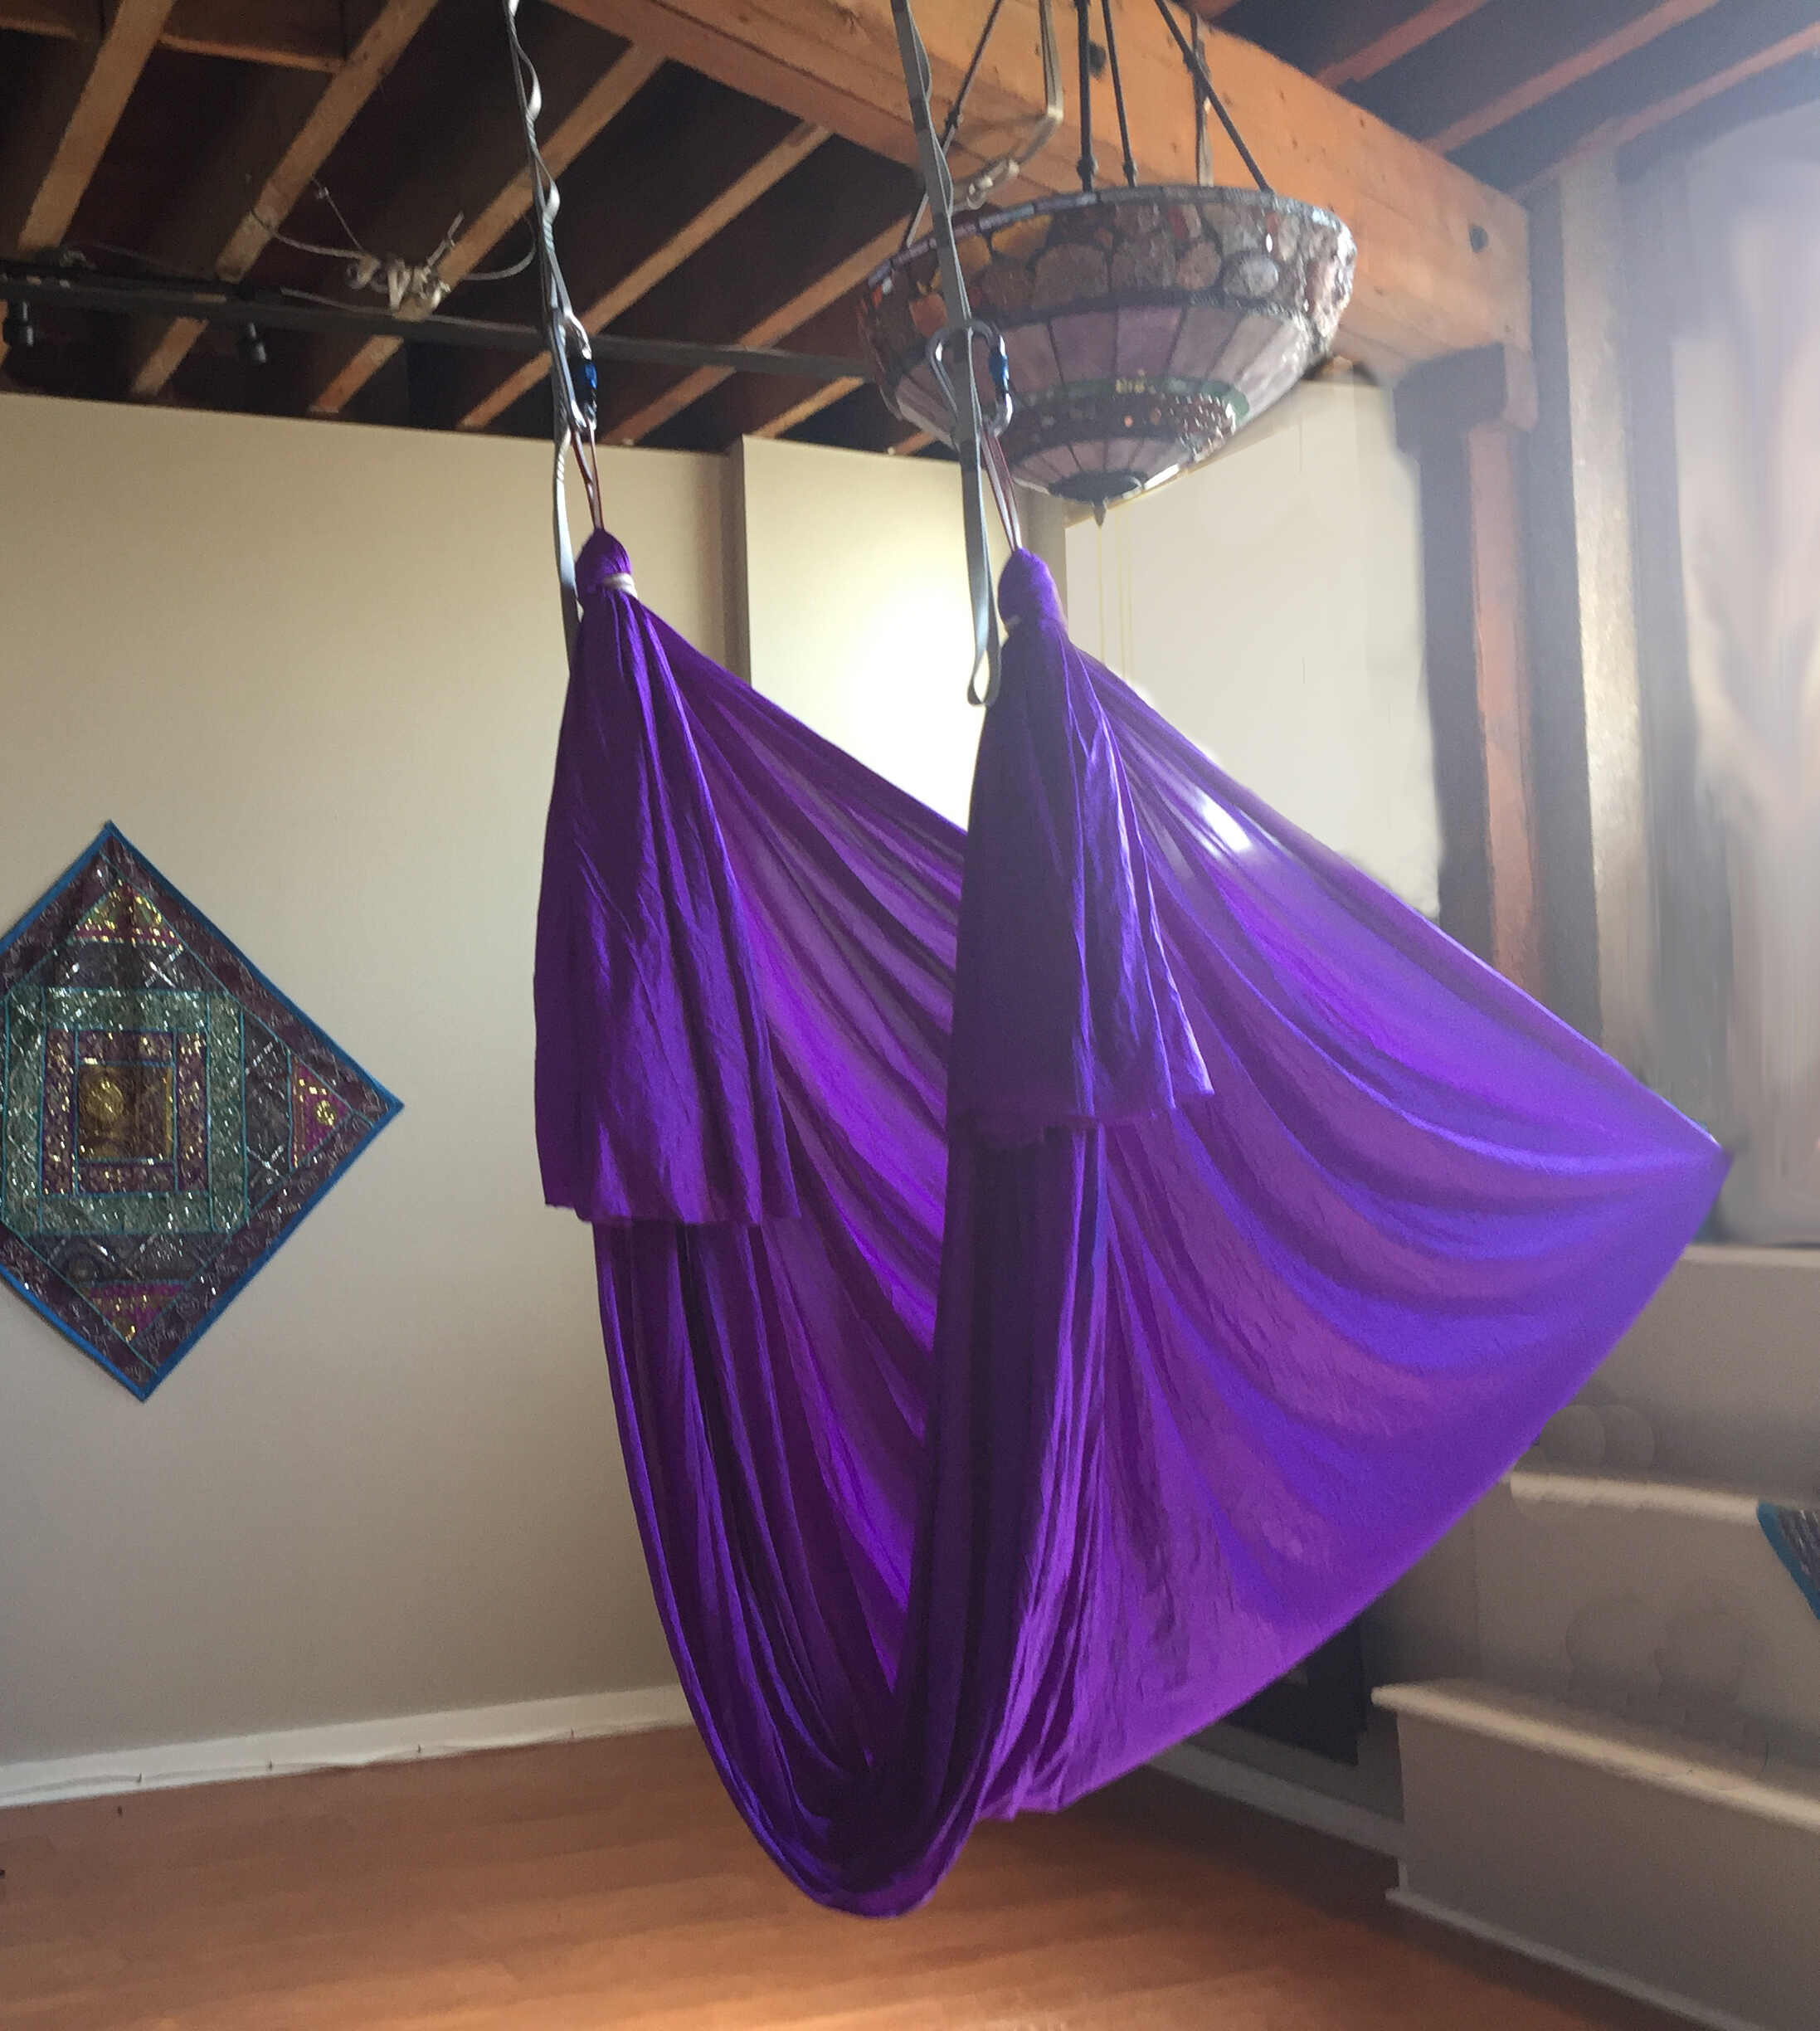 How To Hang Aerial Hammock From Ceiling